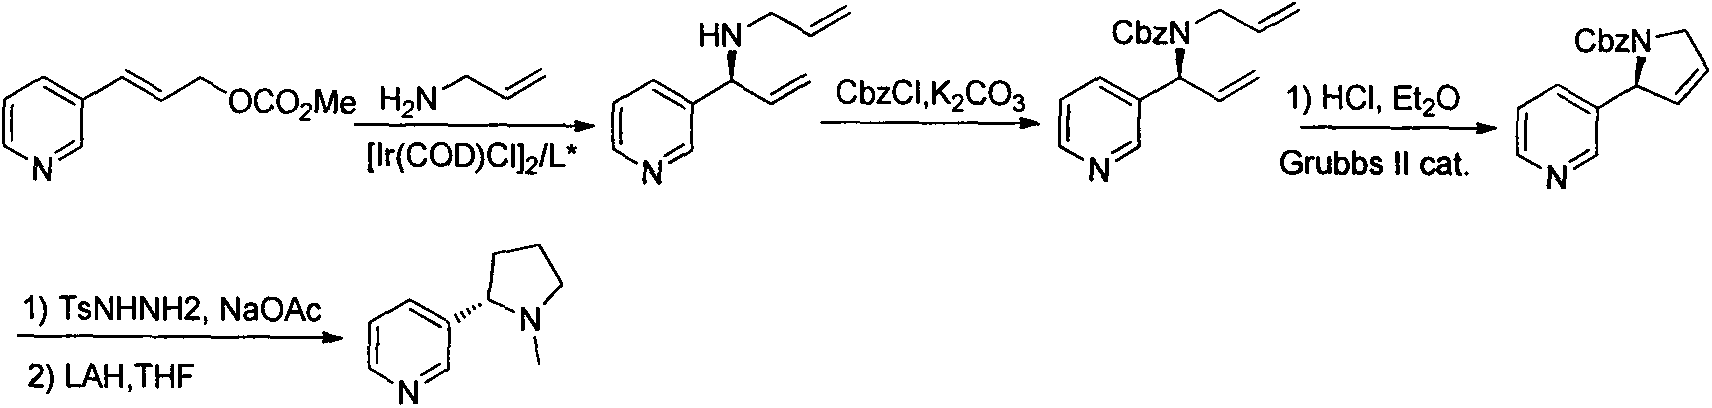 Asymmetric synthesis method for botanical pesticide nicotine and anabasine